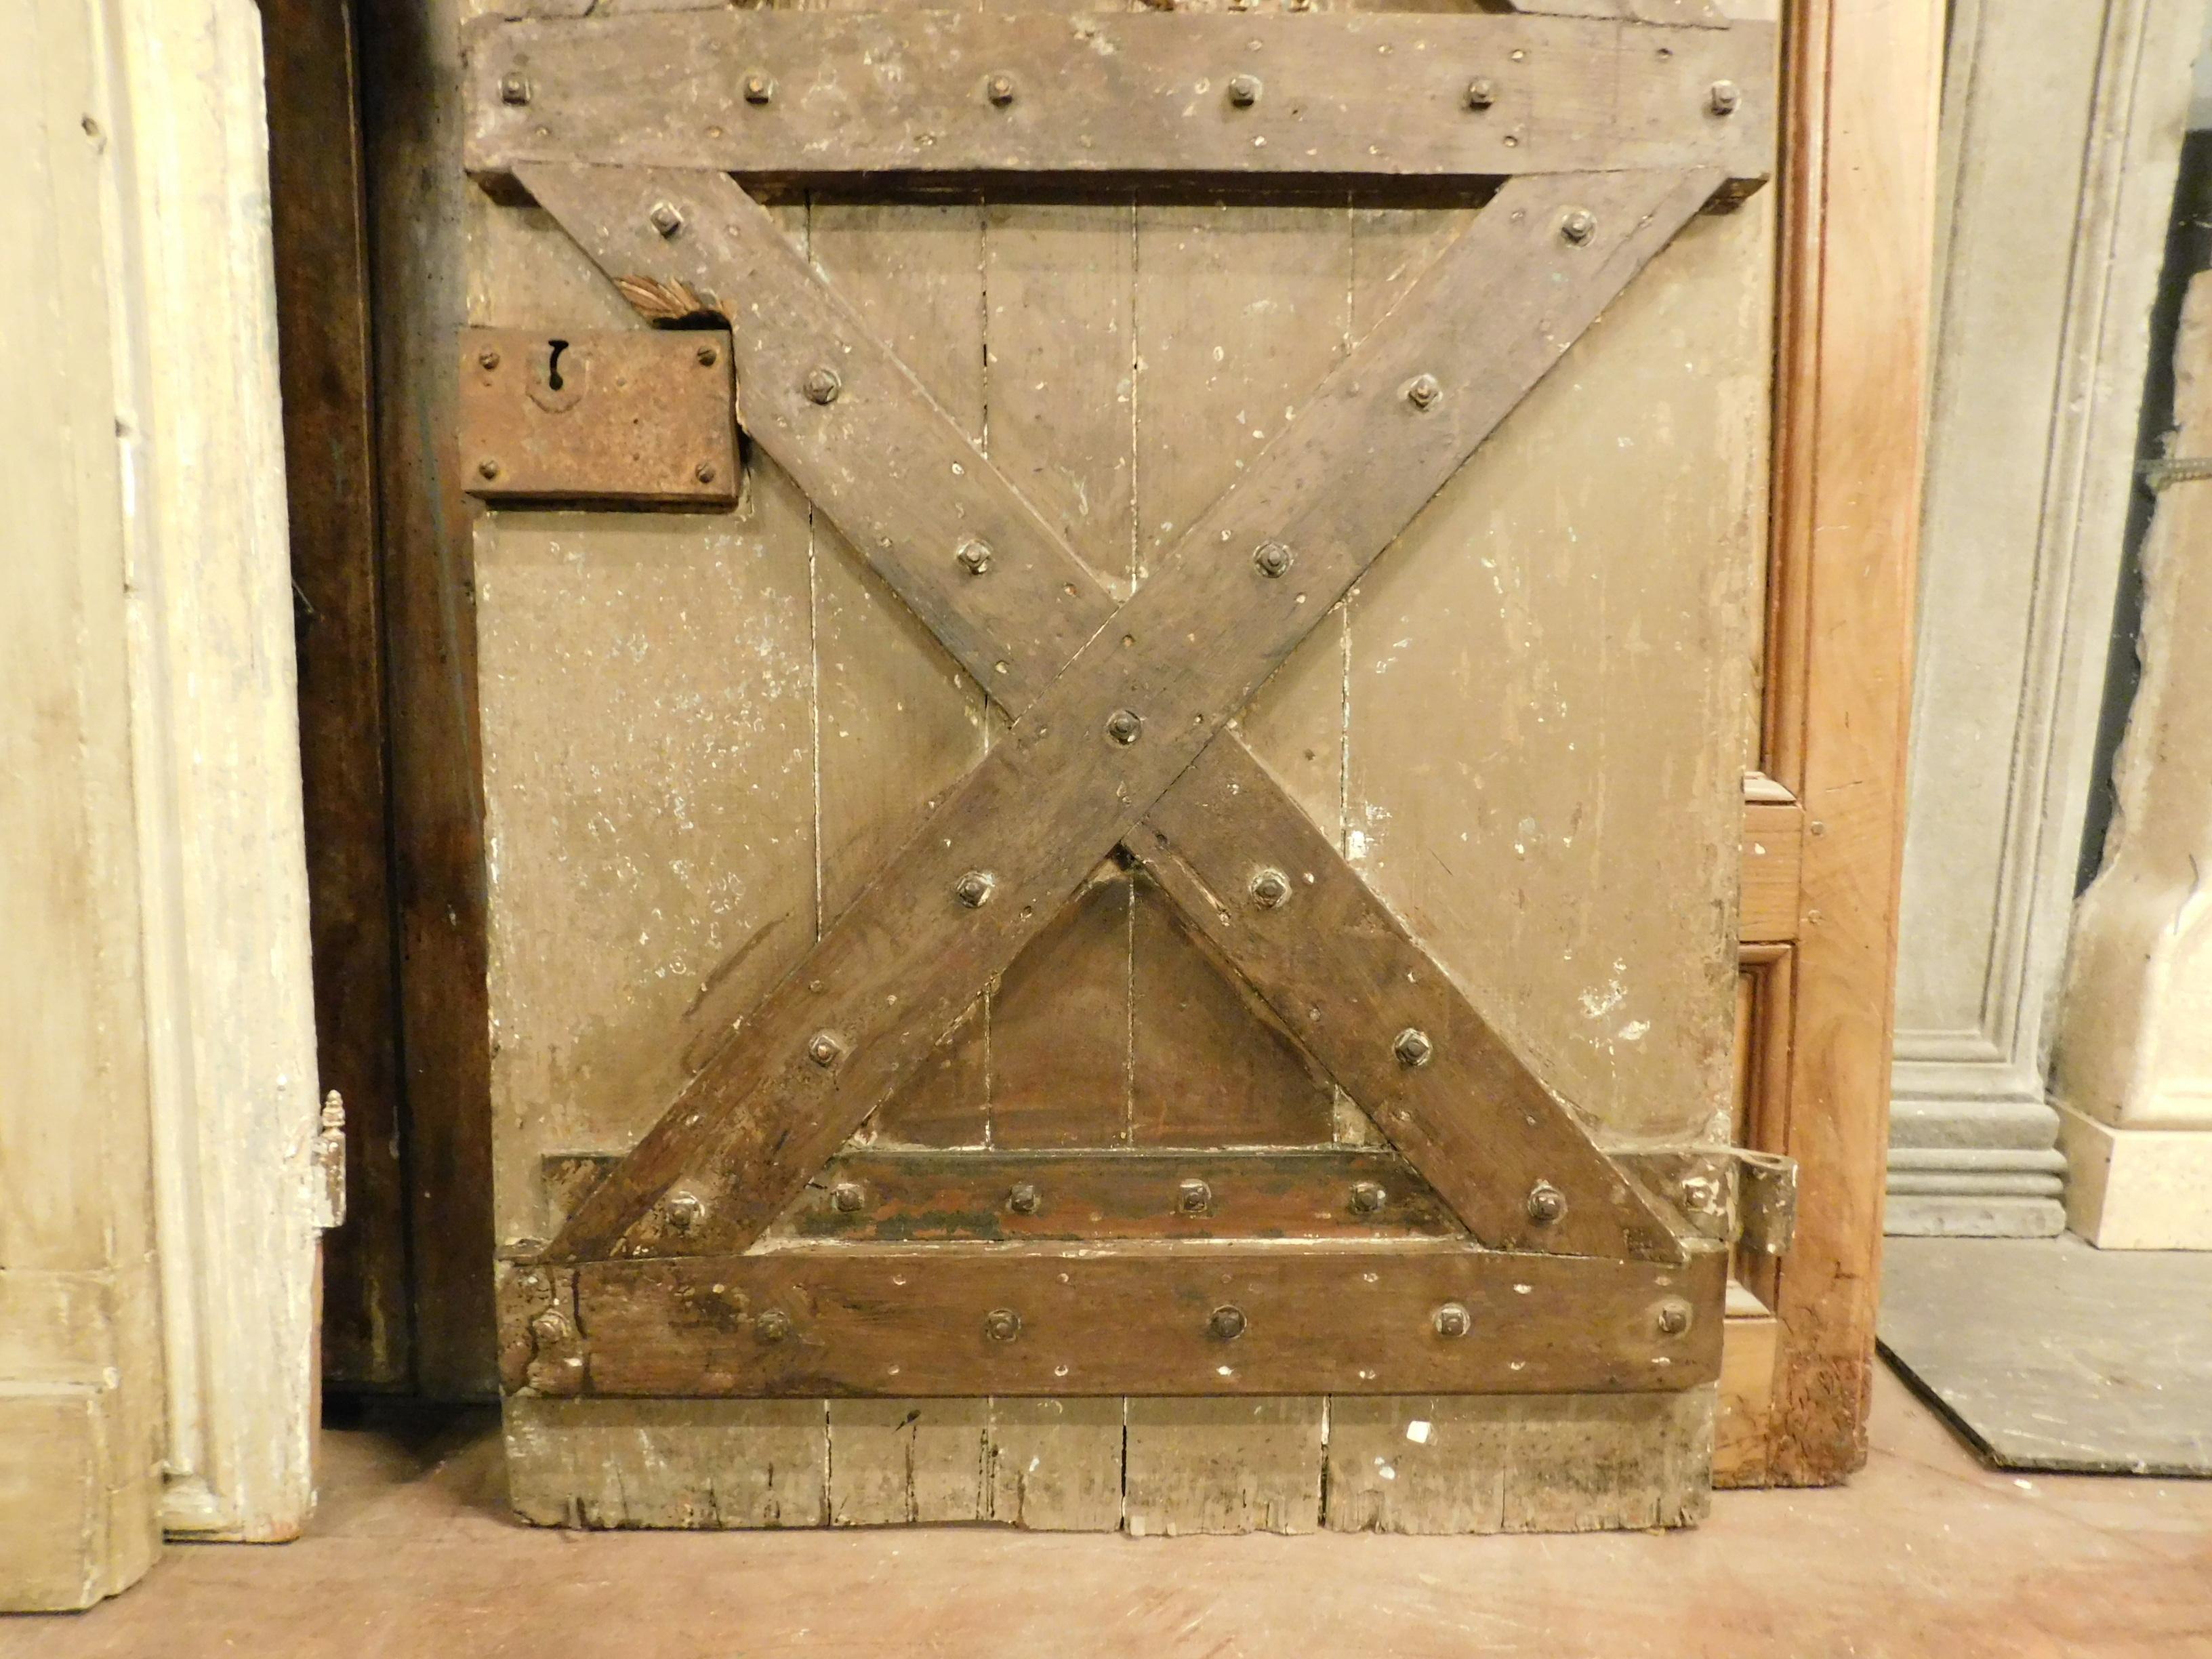 Hand-Carved Antique Prison Door Lacquered and with Original Irons, 19th Century Italy